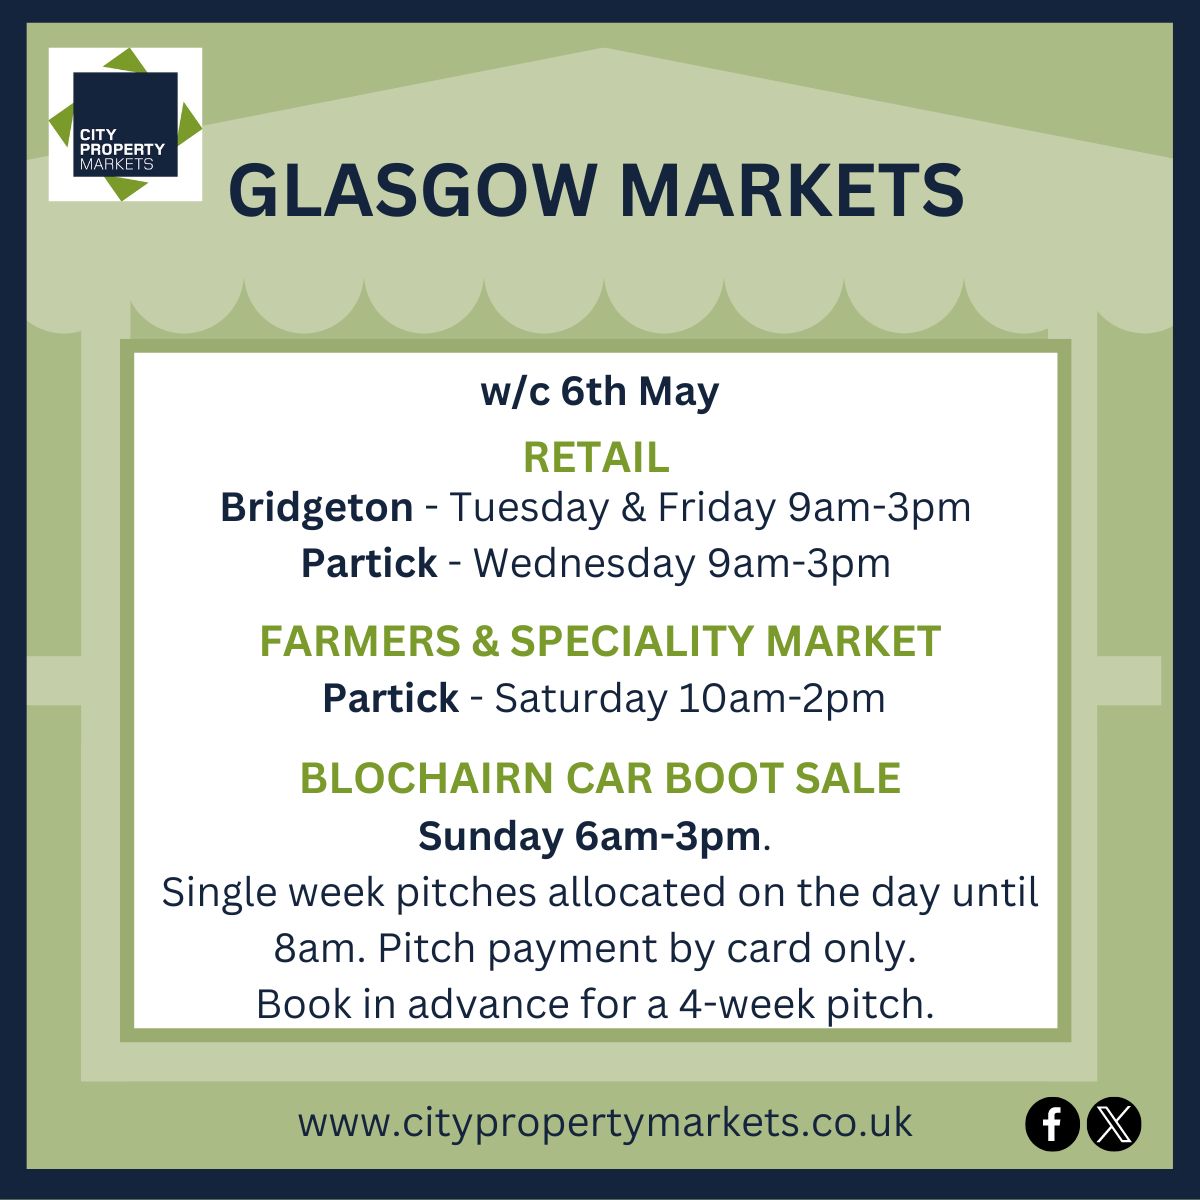 For more details about our Glasgow Markets, see citypropertymarkets.co.uk 
#CityPropertyMarkets #GlasgowMarkets #Glasgow #ShopLocal #WhatsOnGlasgow 
Details correct at time of publication, but may be subject to change